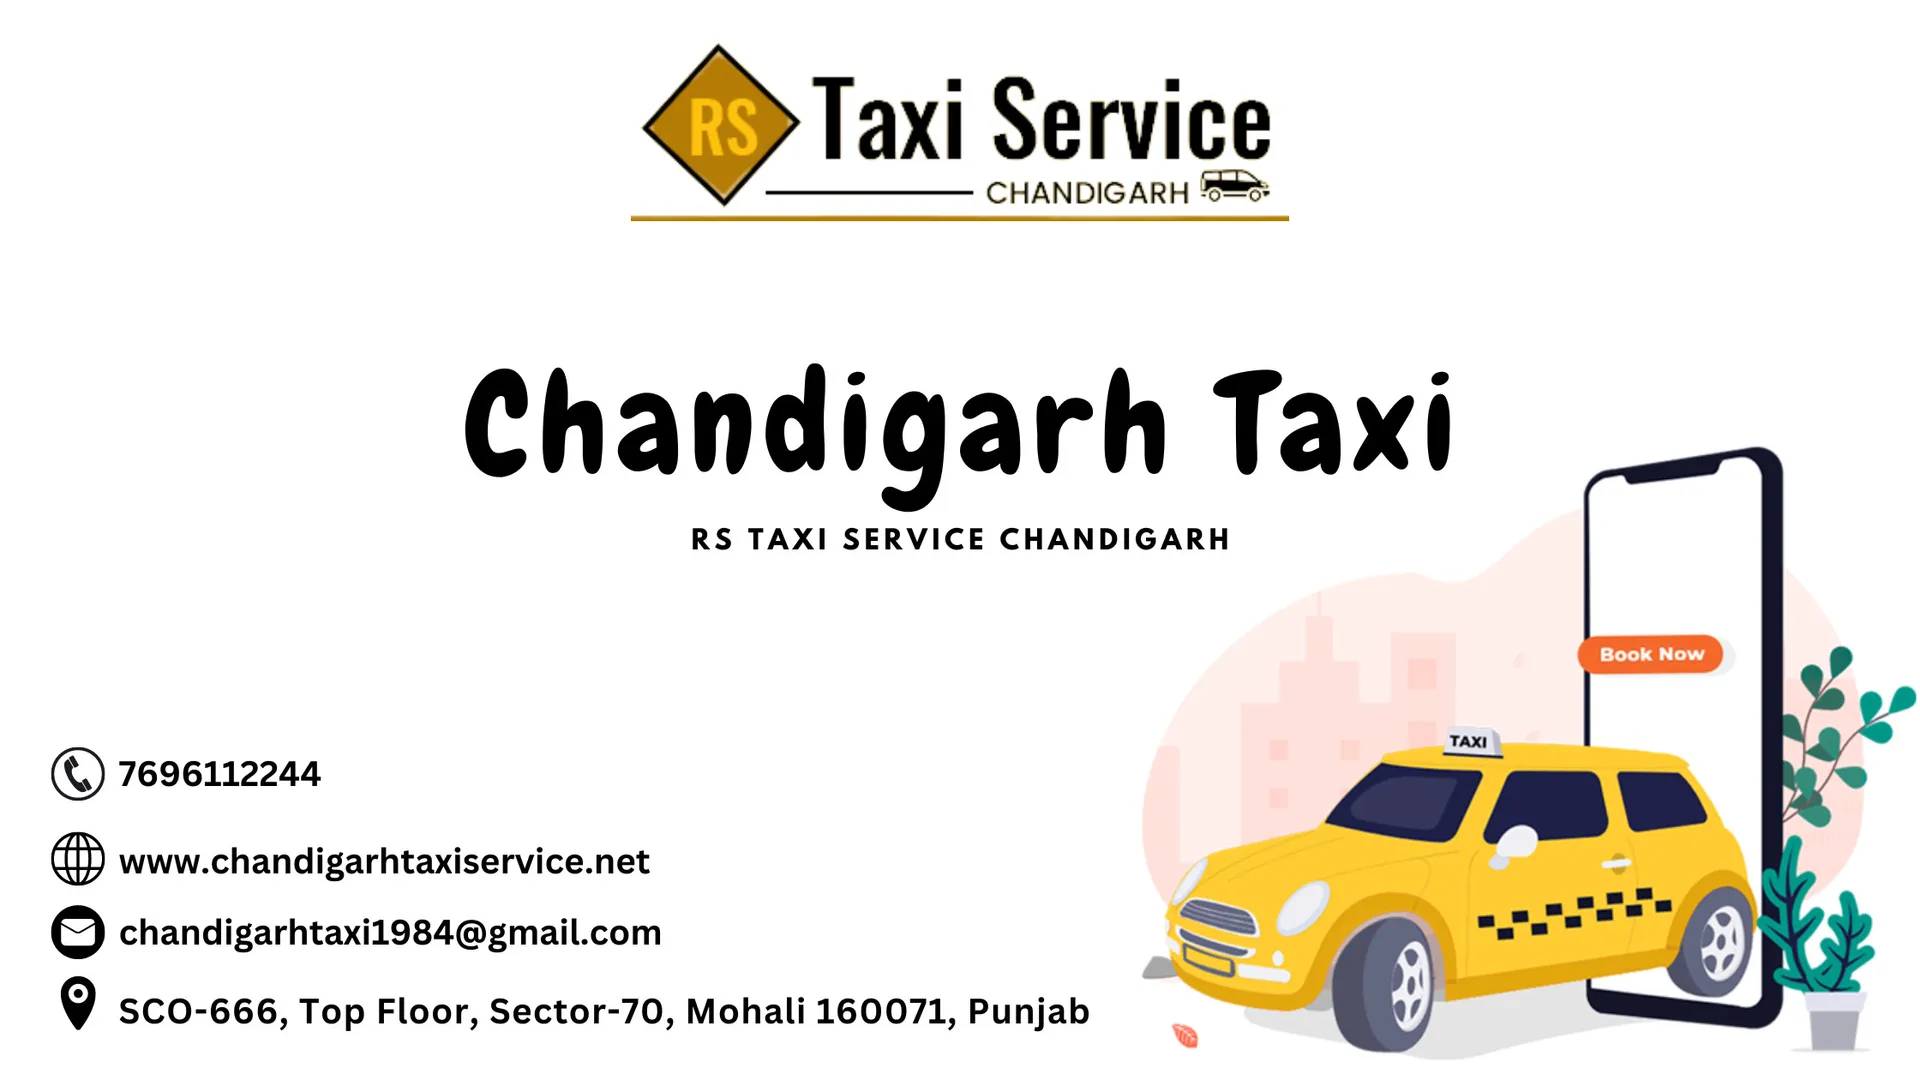 RS Taxi Service Chandigarh - Your Trusted Companion for Chandigarh Taxi Needs

Experience seamless and reliable transportation in Chandigarh with RS Taxi Service. As a leading taxi service provider, we are committed to delivering exceptional customer satisfaction.

Book your ride now and let the journey begin! https://www.chandigarhtaxiservice.net/